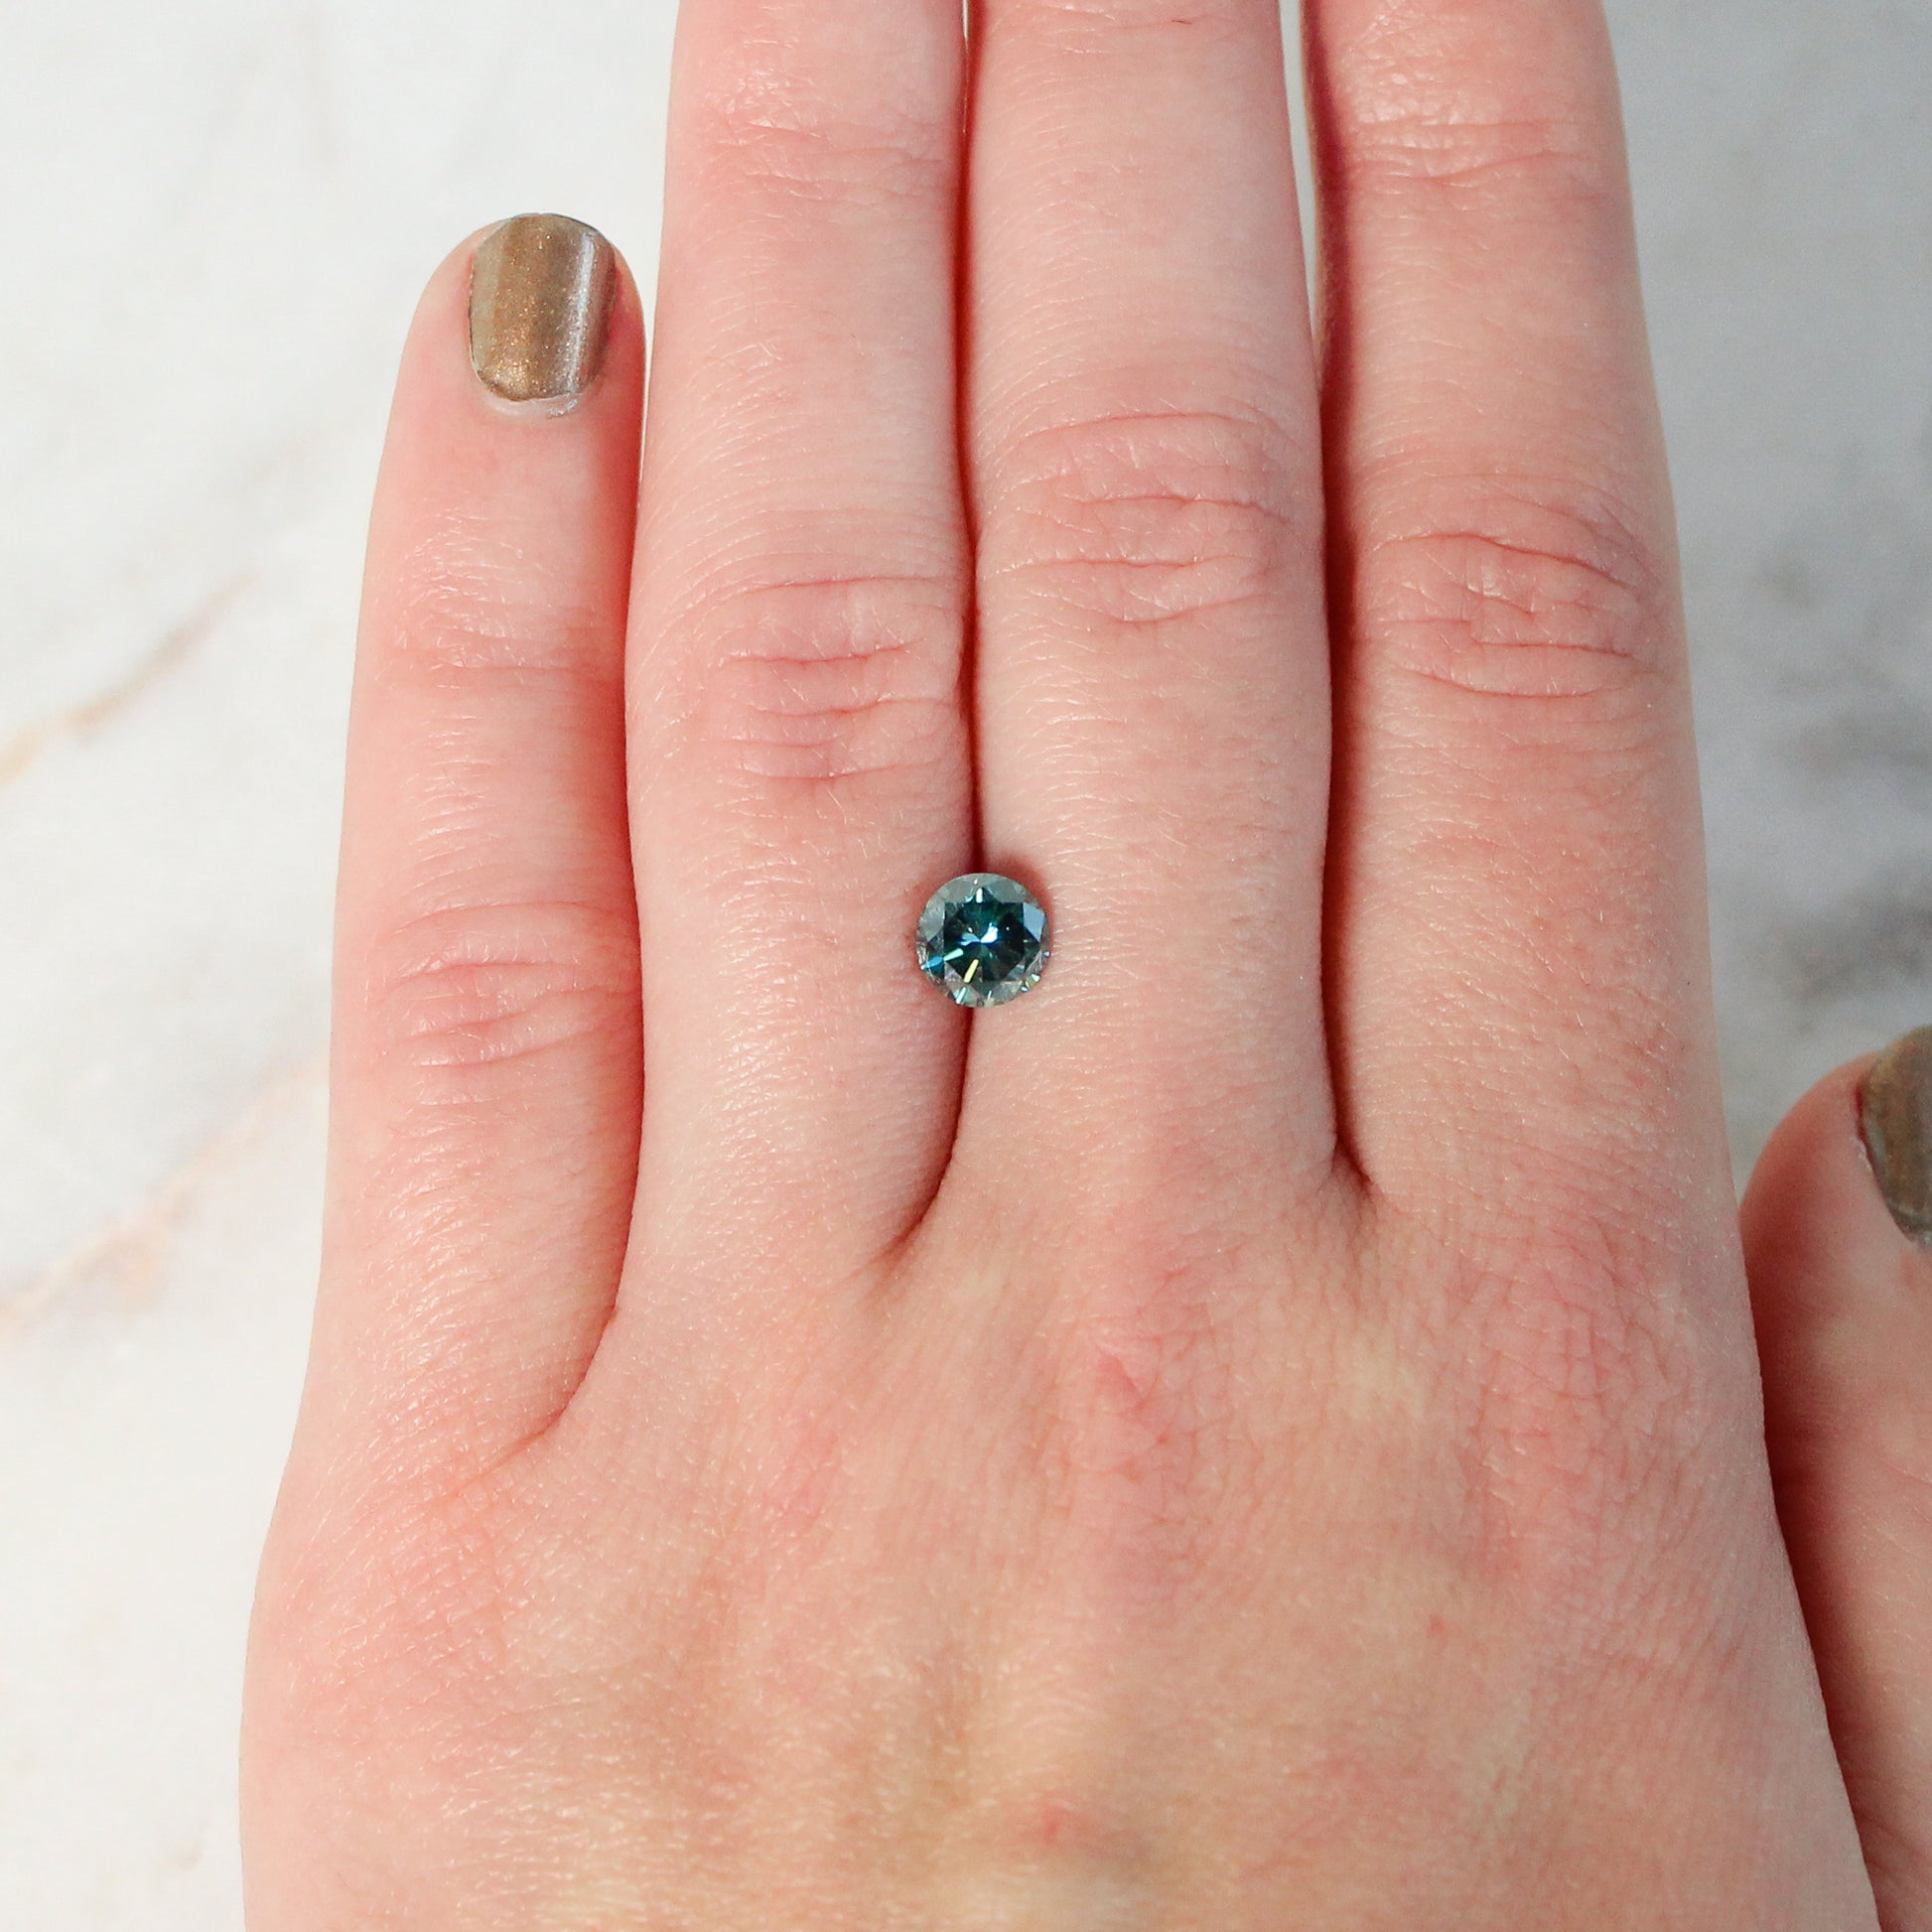 .70 carat -  Black & Teal Moissanite - Inventory Code MO70 - Midwinter Co. Alternative Bridal Rings and Modern Fine Jewelry